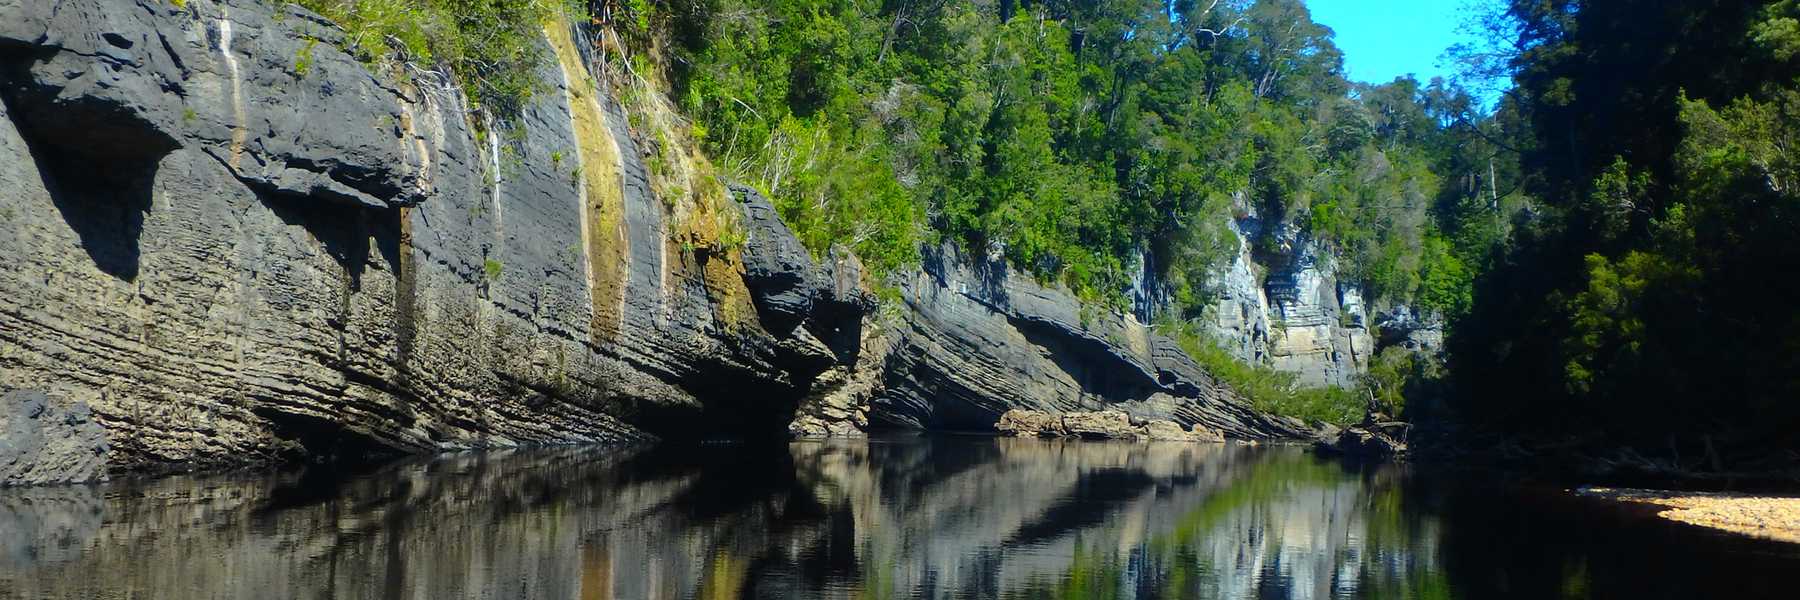 Reflections of limestone cliffs along the Lower Franklin River, Tasmania